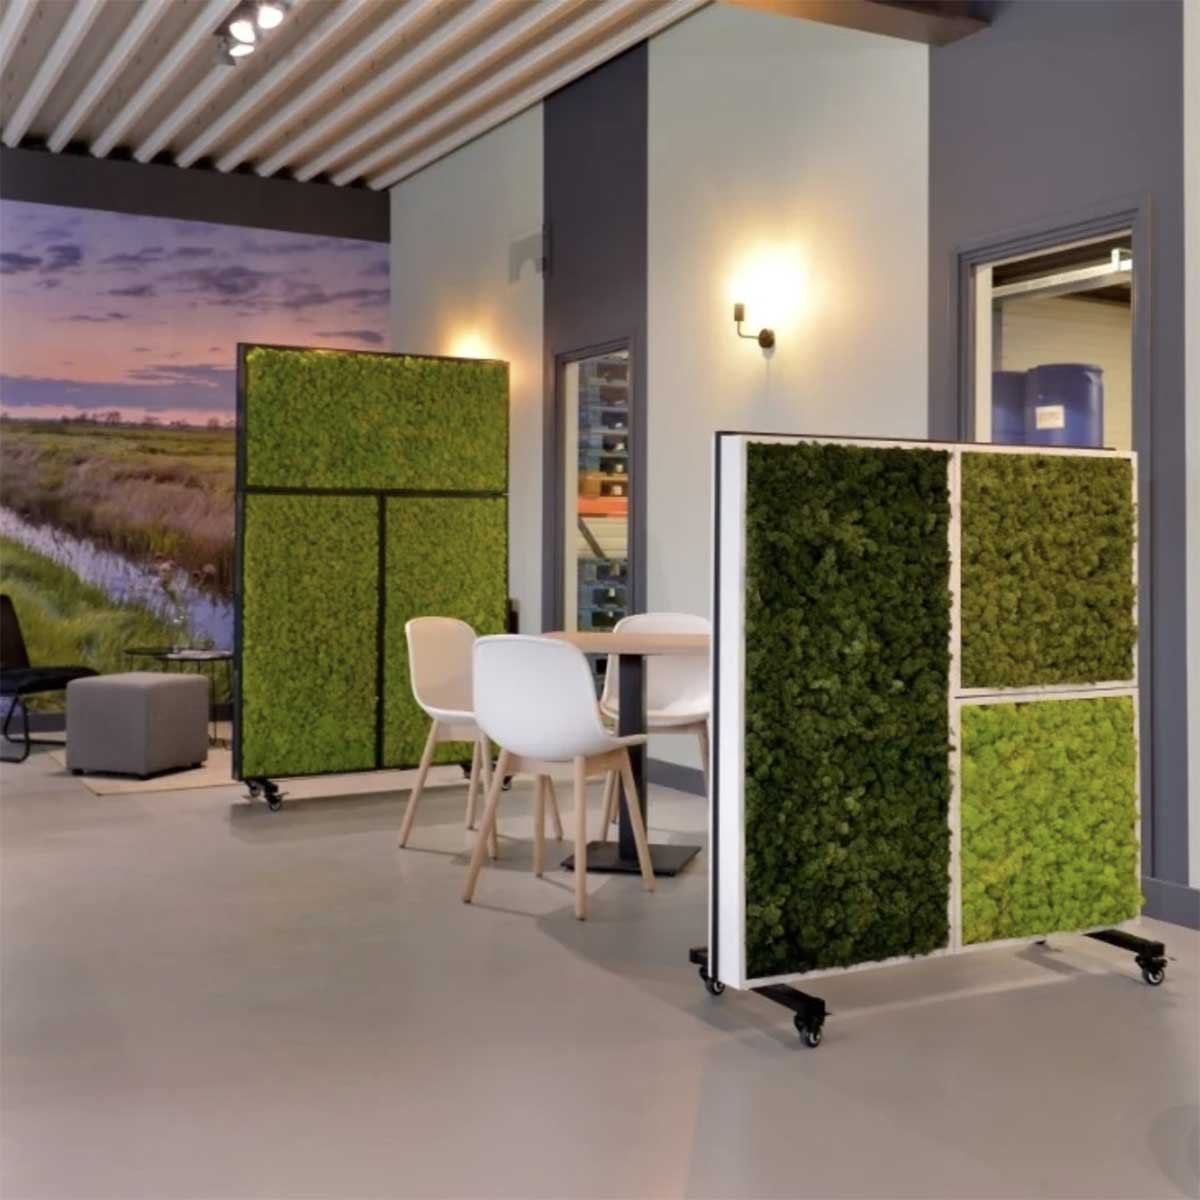 Living wall panels filled with plant life on wheels to divide and separate open plan space in a modern office space